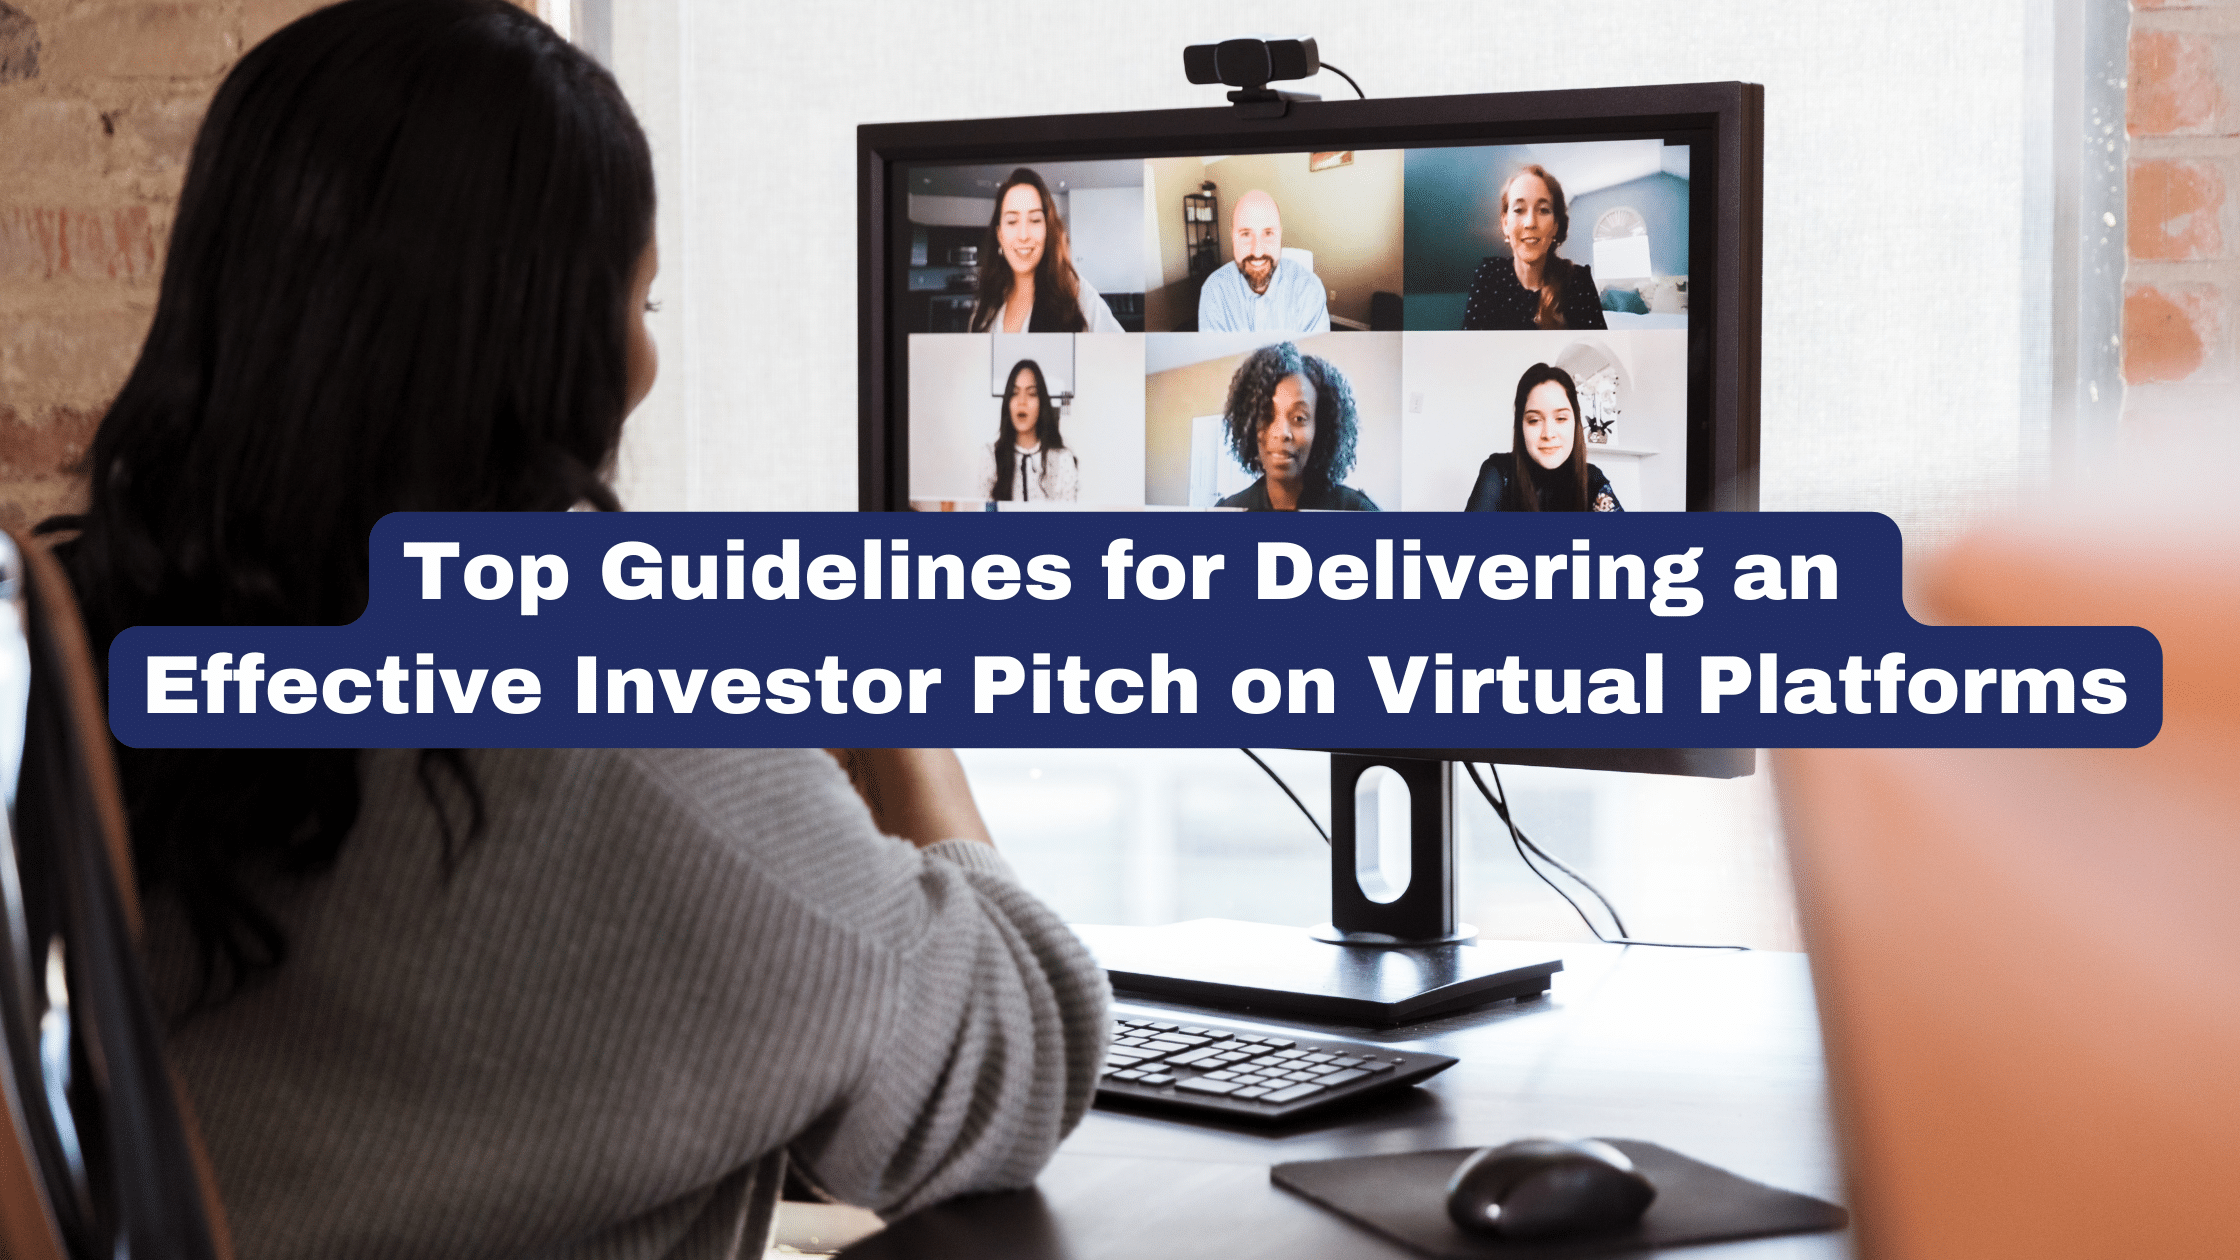 Top Guidelines for Delivering an Effective Investor Pitch on Virtual Platforms cover image